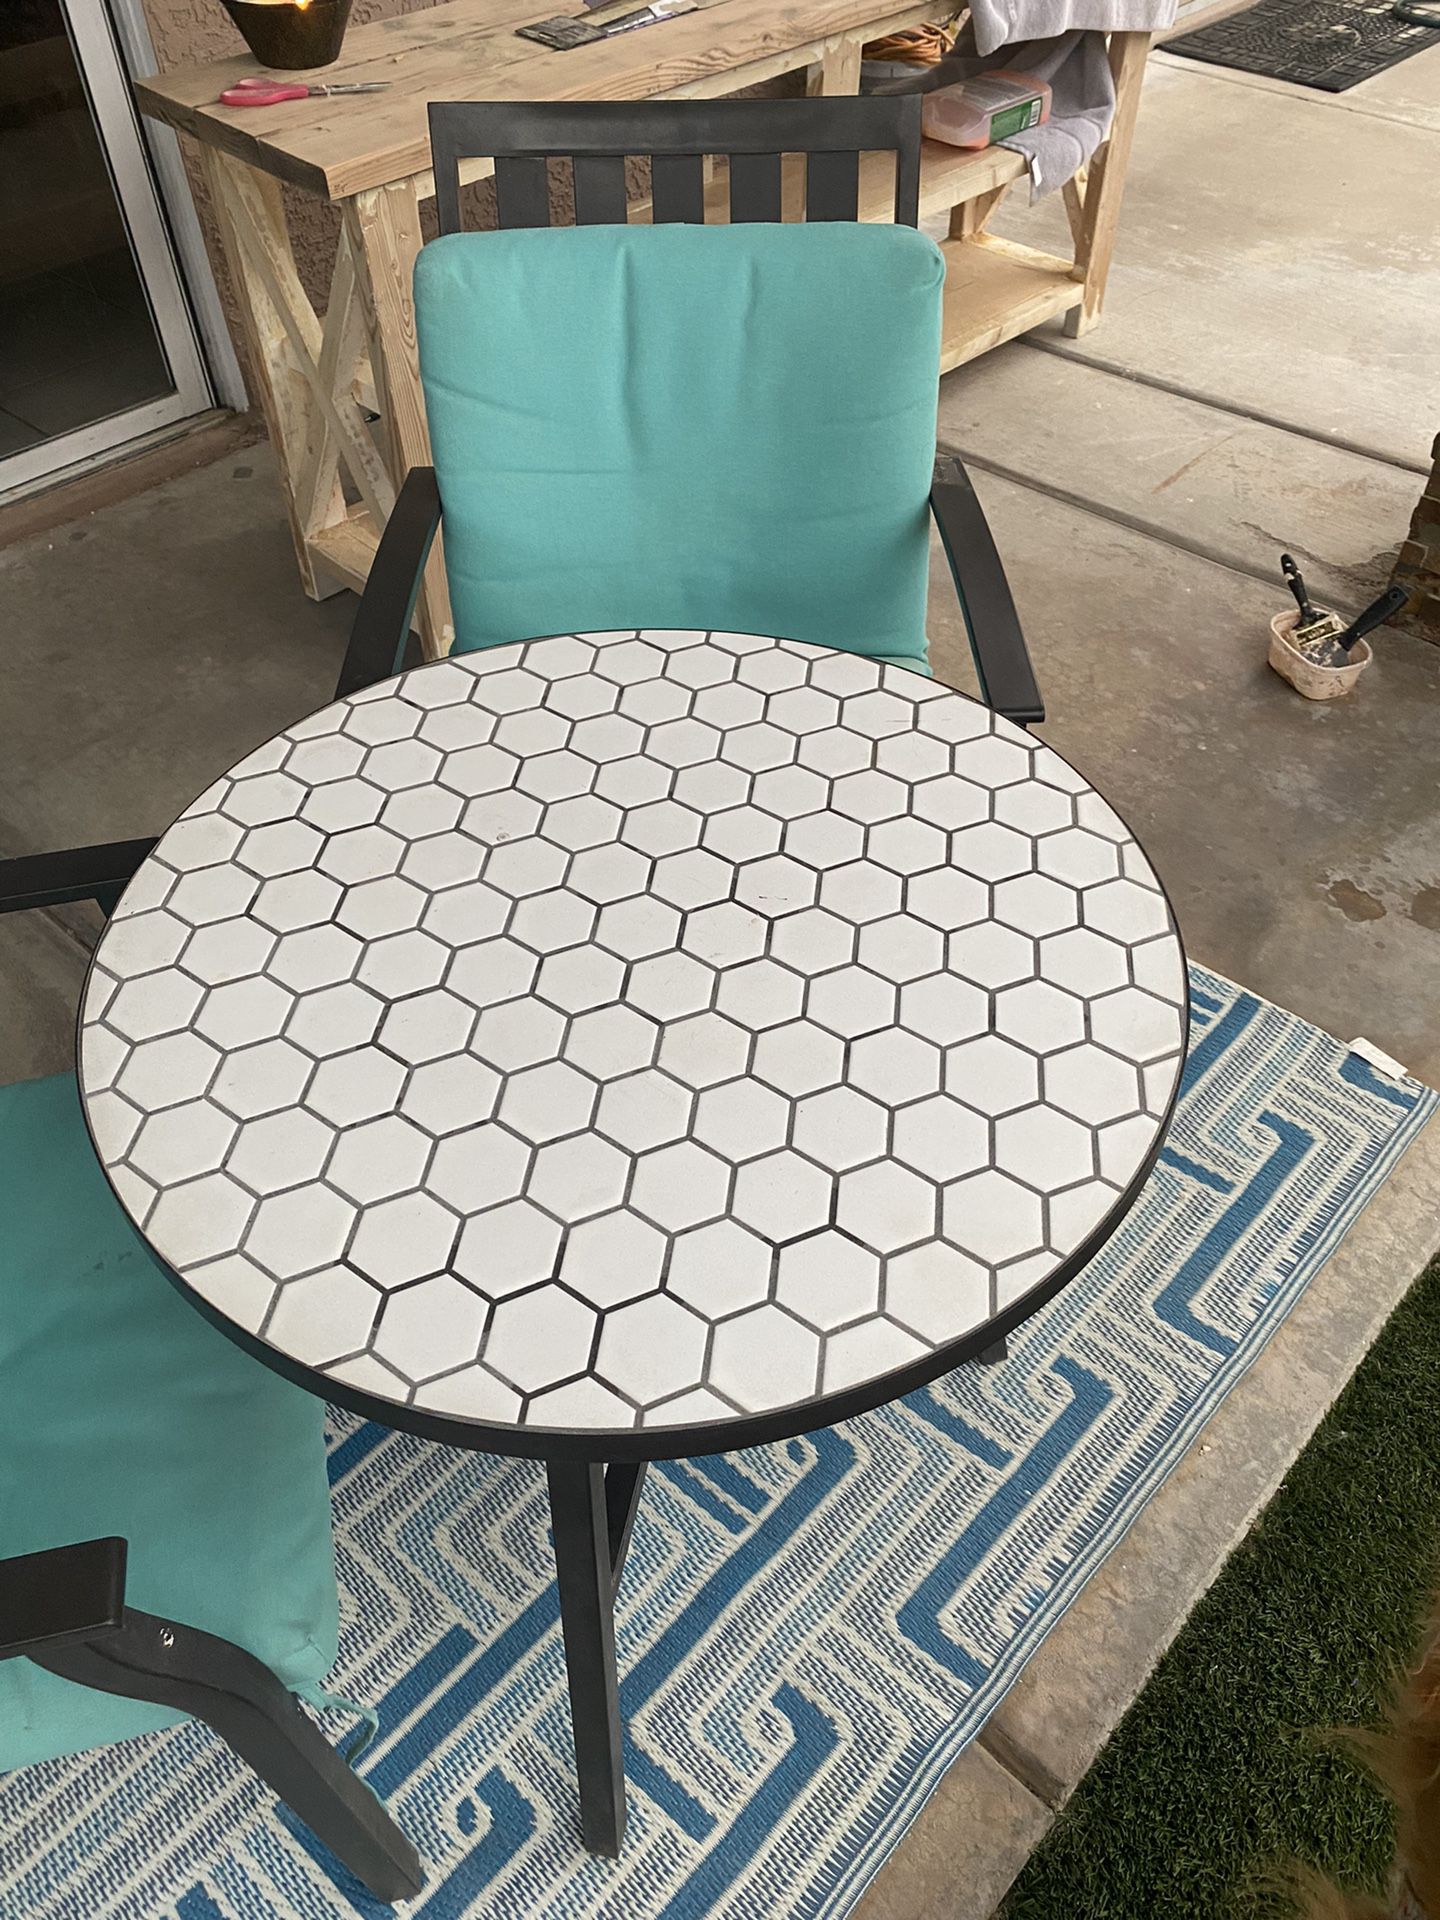 Patio Table And Chairs!